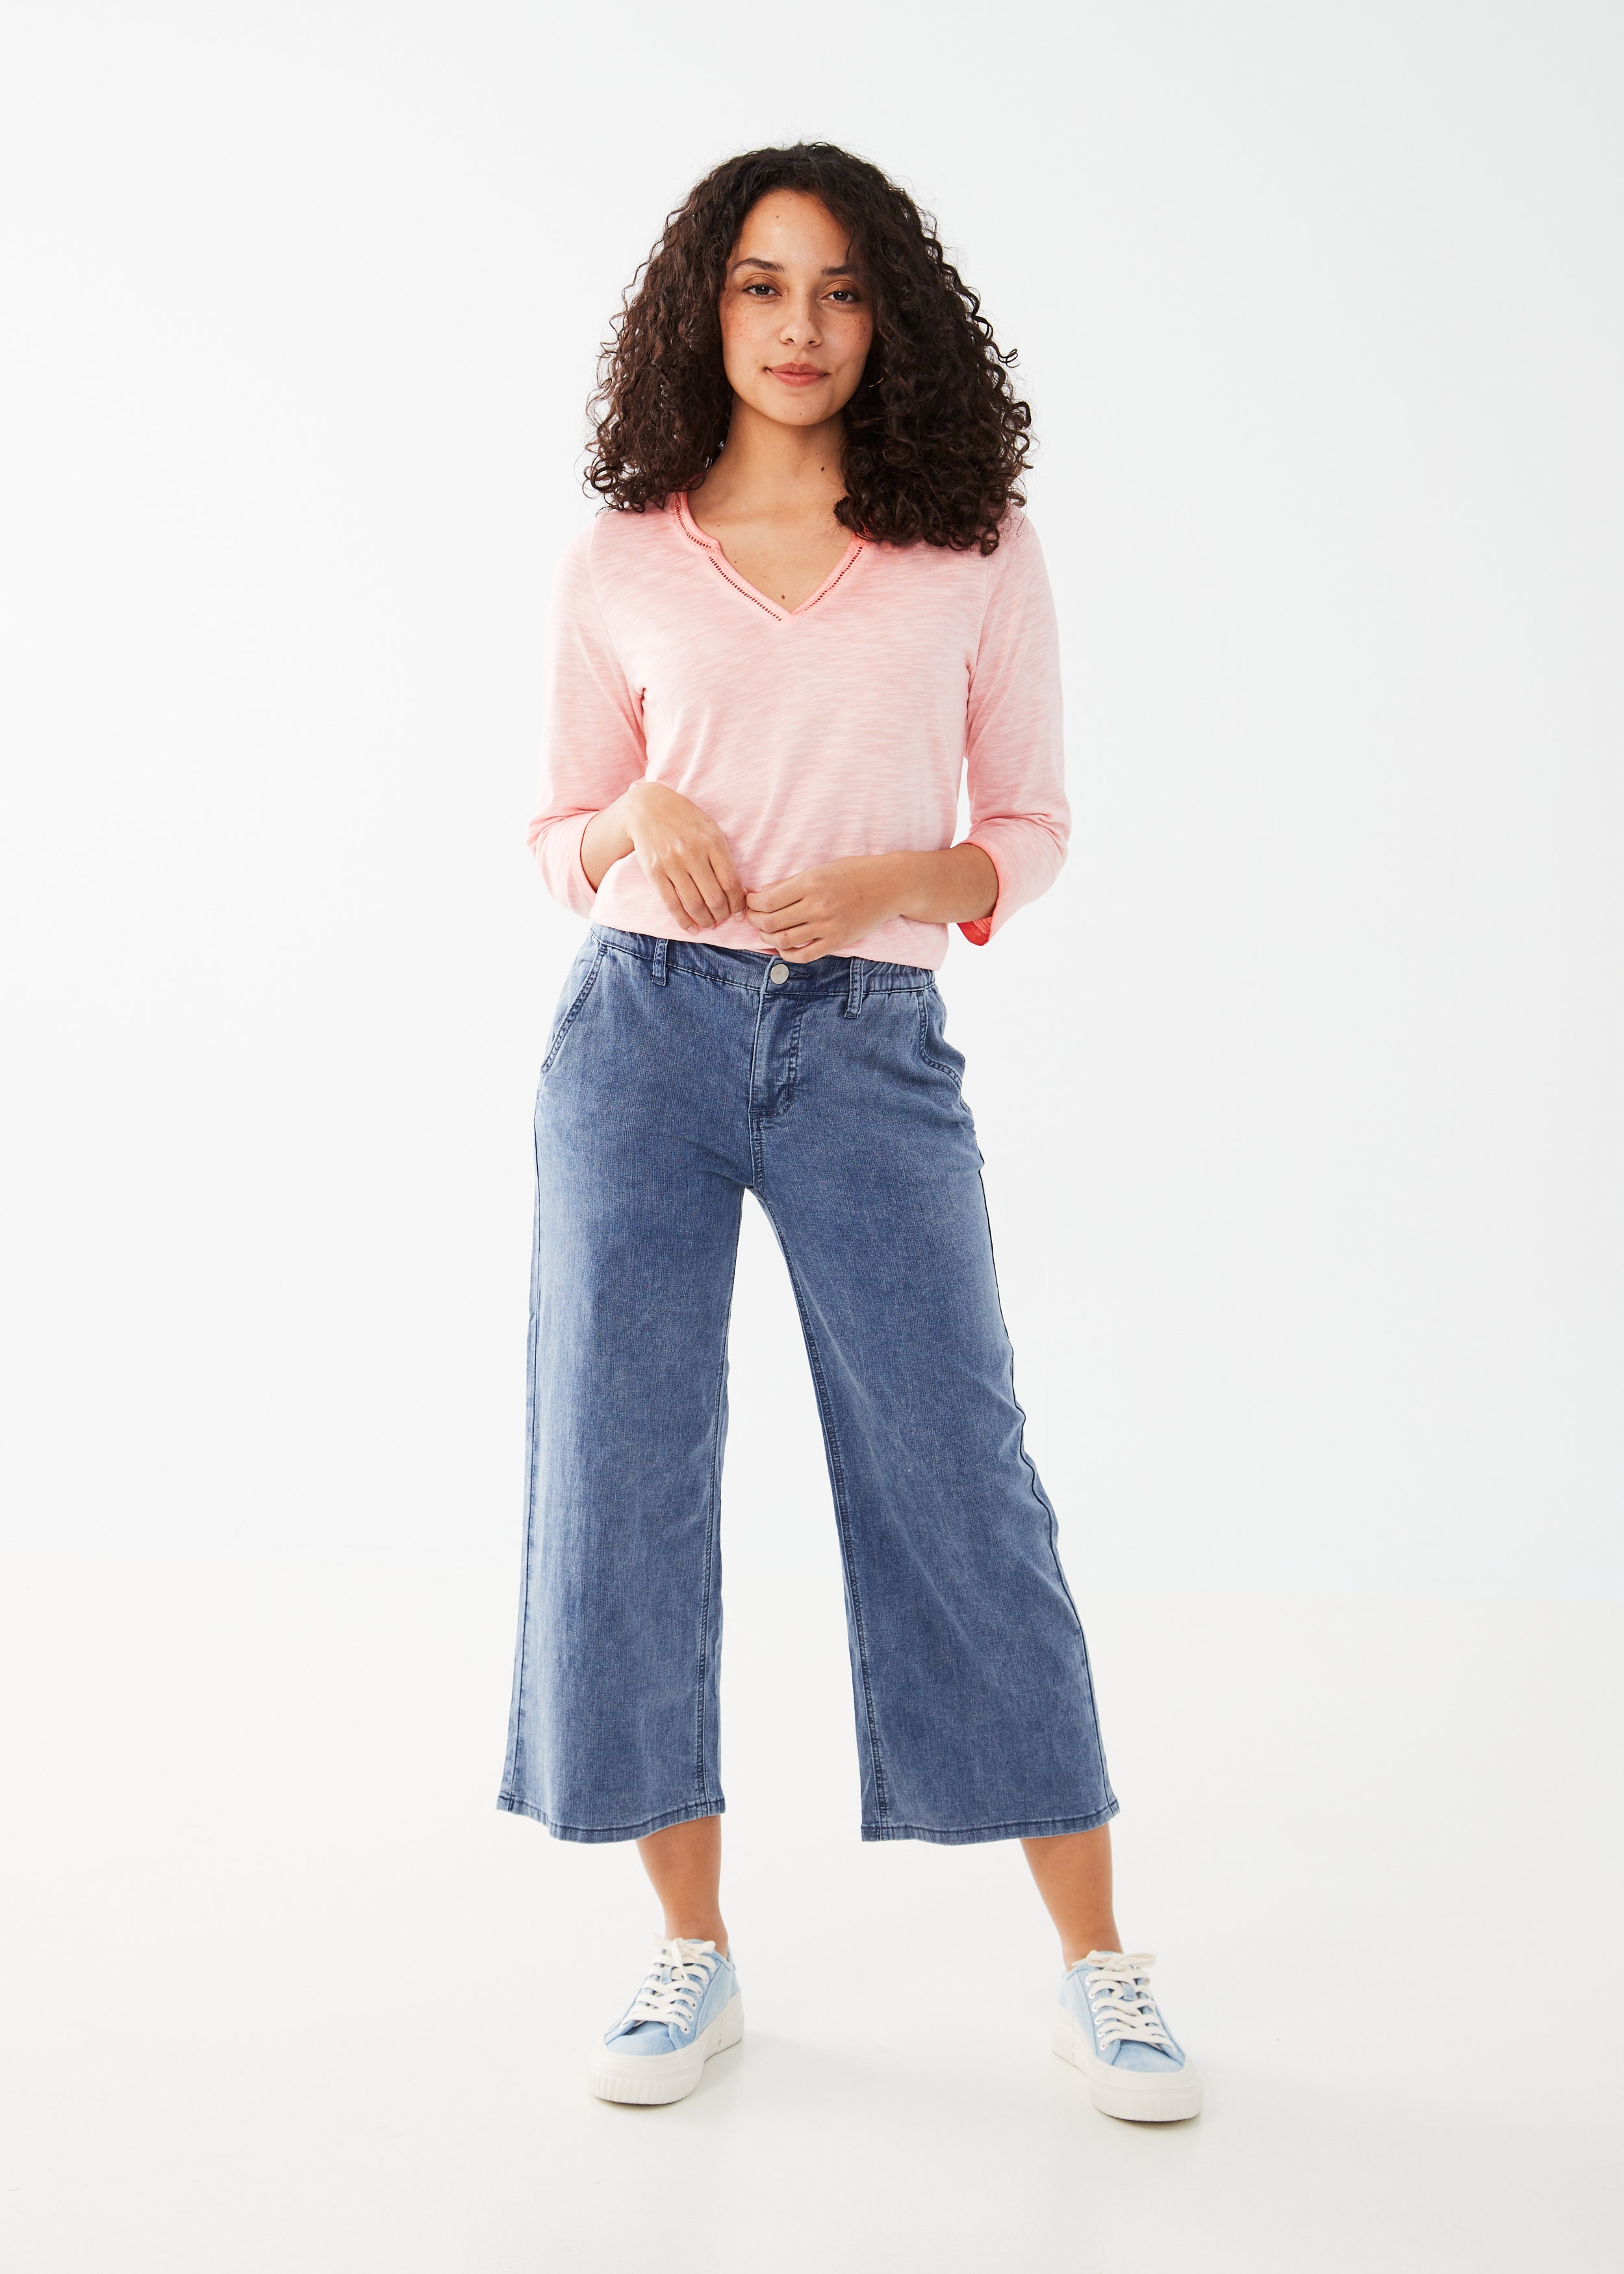 Get ready to feel comfy in our FDJ Pull-On Wide Leg Crop. The soft fabric and elastic waist provide maximum comfort, while the zipper and button closure make for easy wearing. Perfect for those off-duty days or lounging at home (and looking stylish while doing it). No one said fashion had to be uncomfortable!